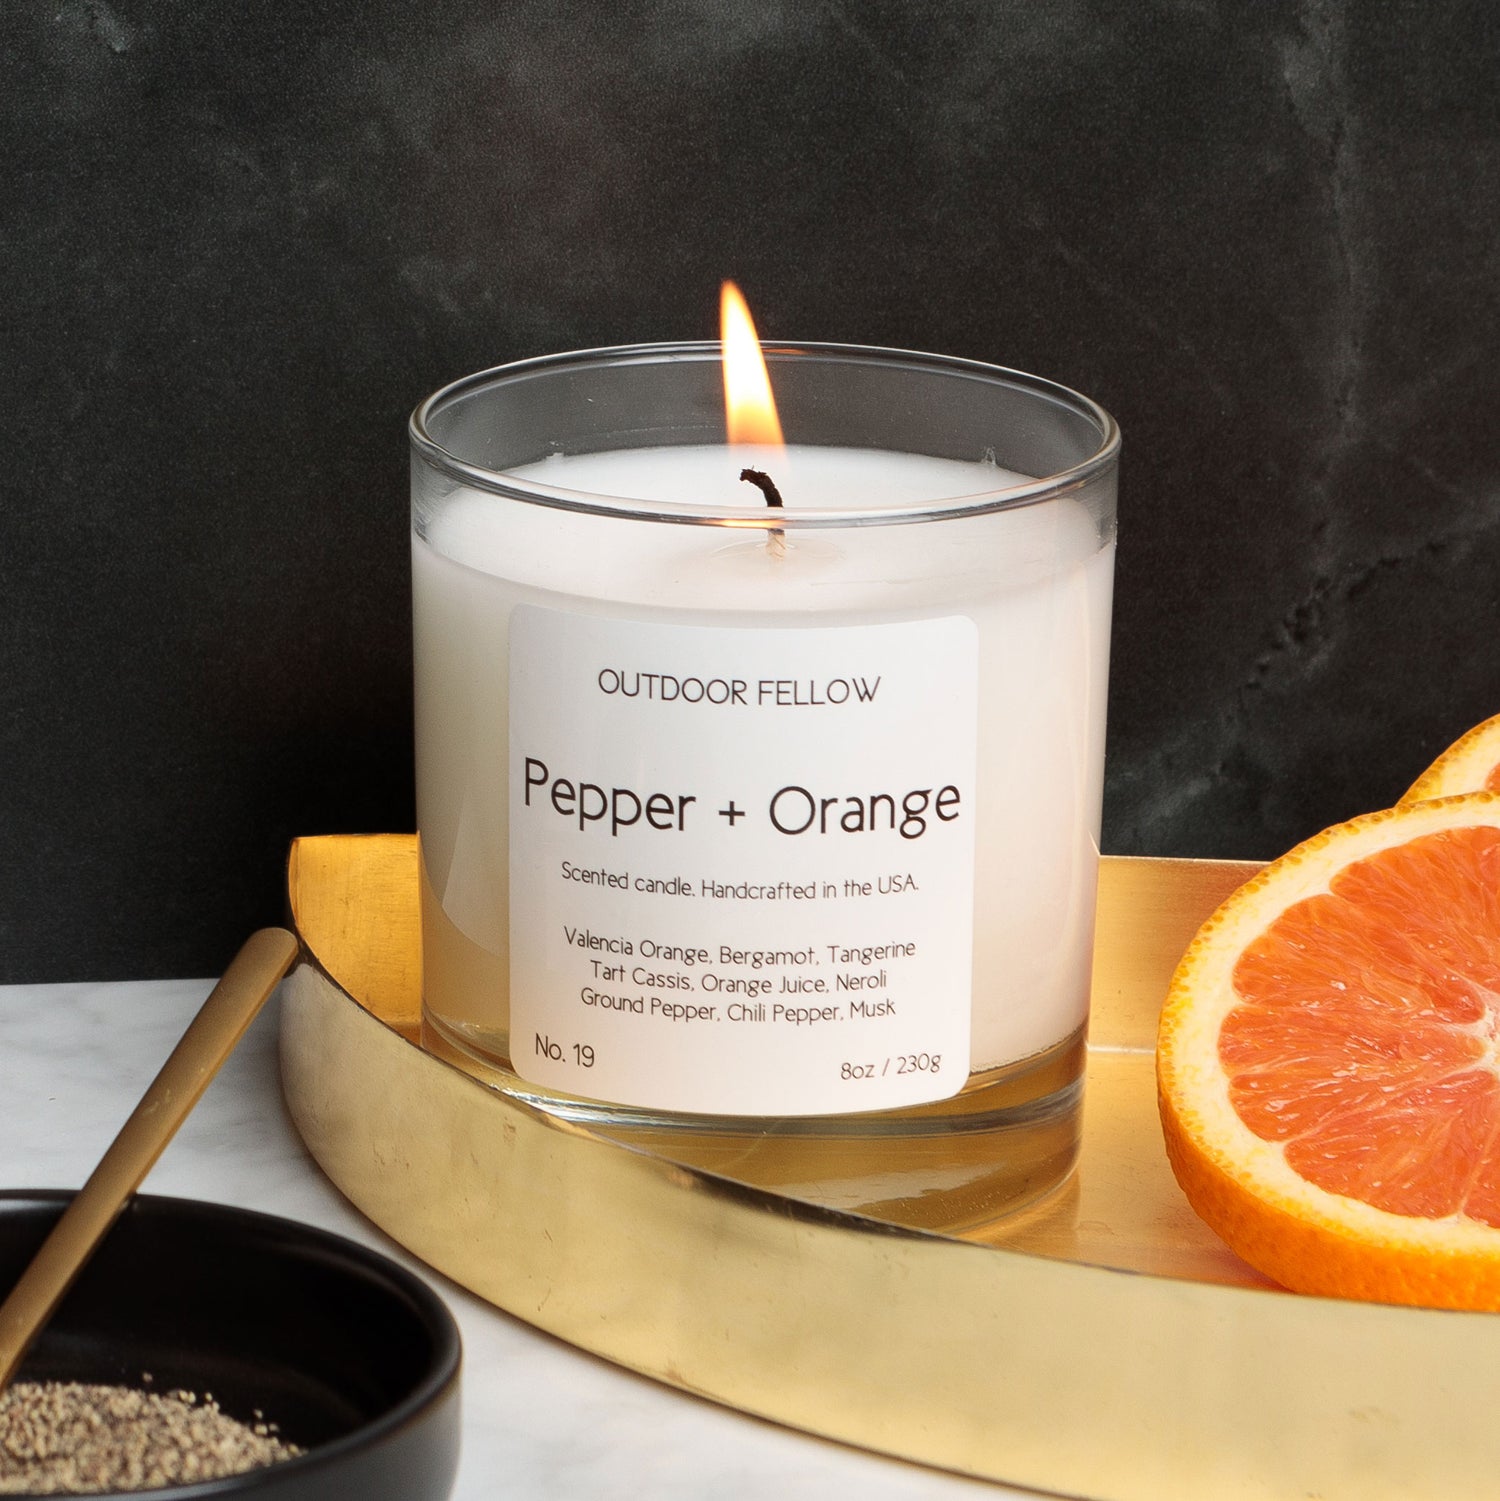 Pepper and Orange scented candle on a gold tray next to orange slices and ground pepper